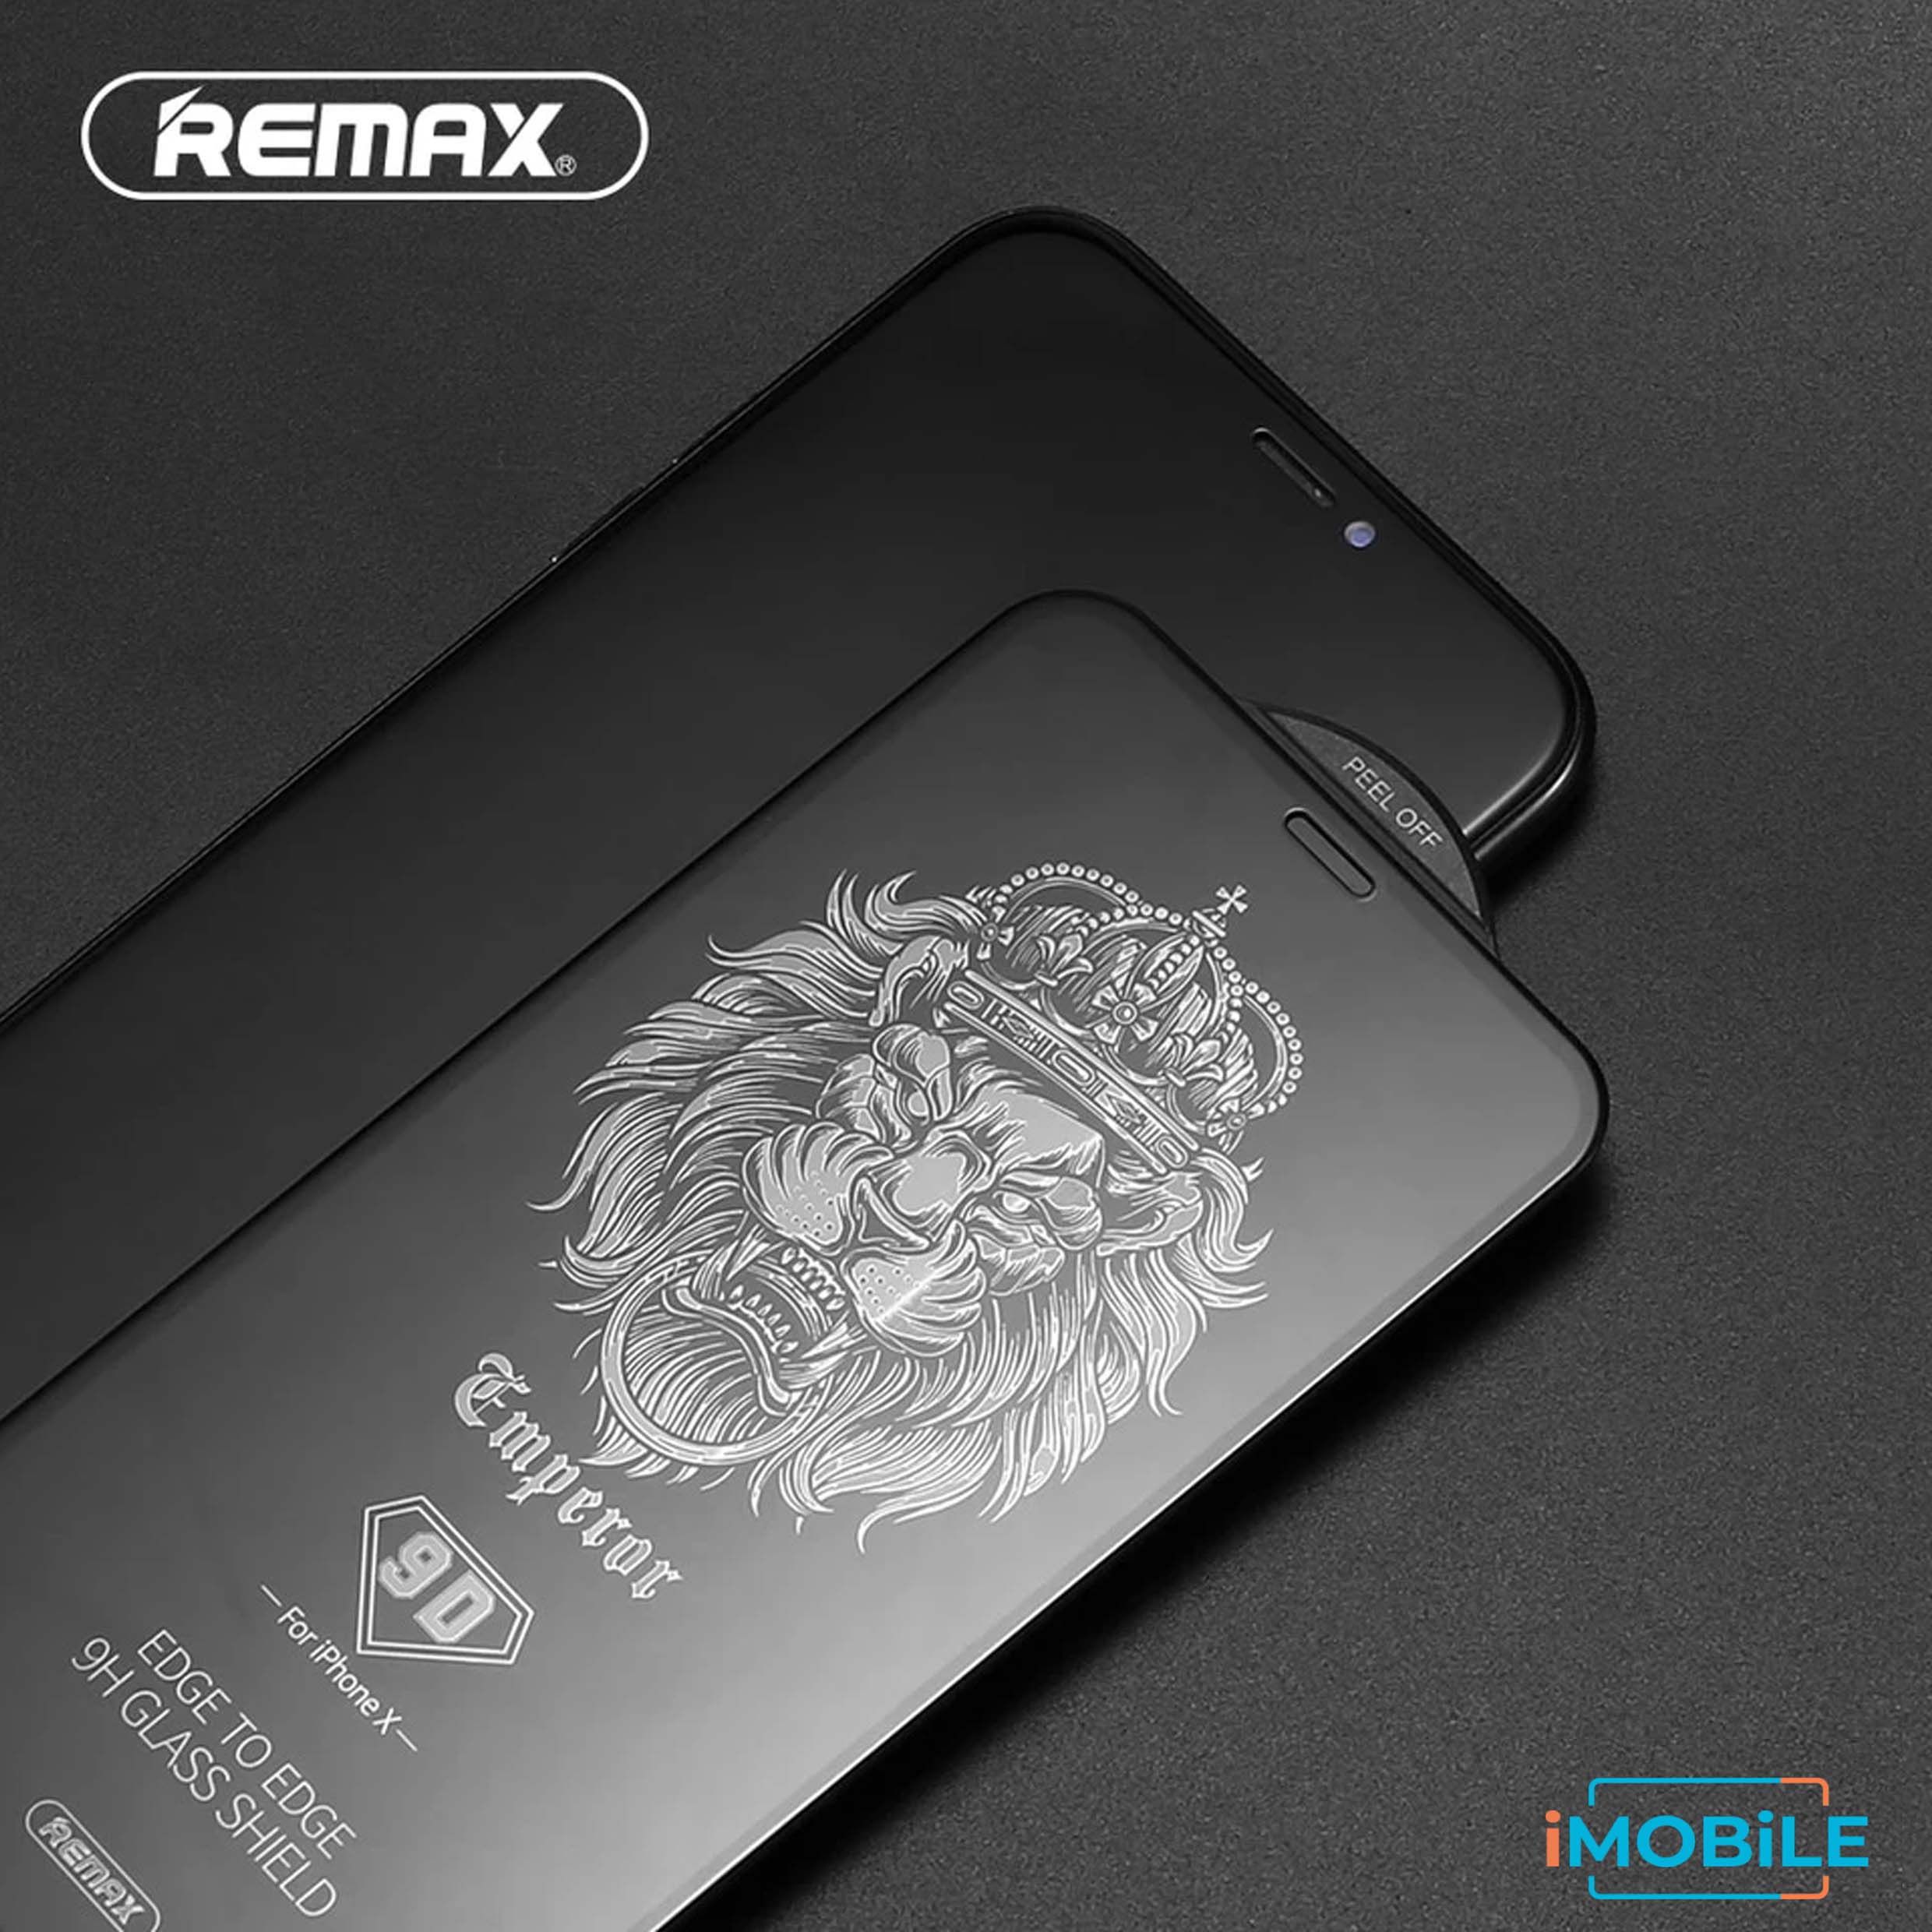 Remax 2.5D Tempered Glass with Envelope Pack, iPhone XR/11